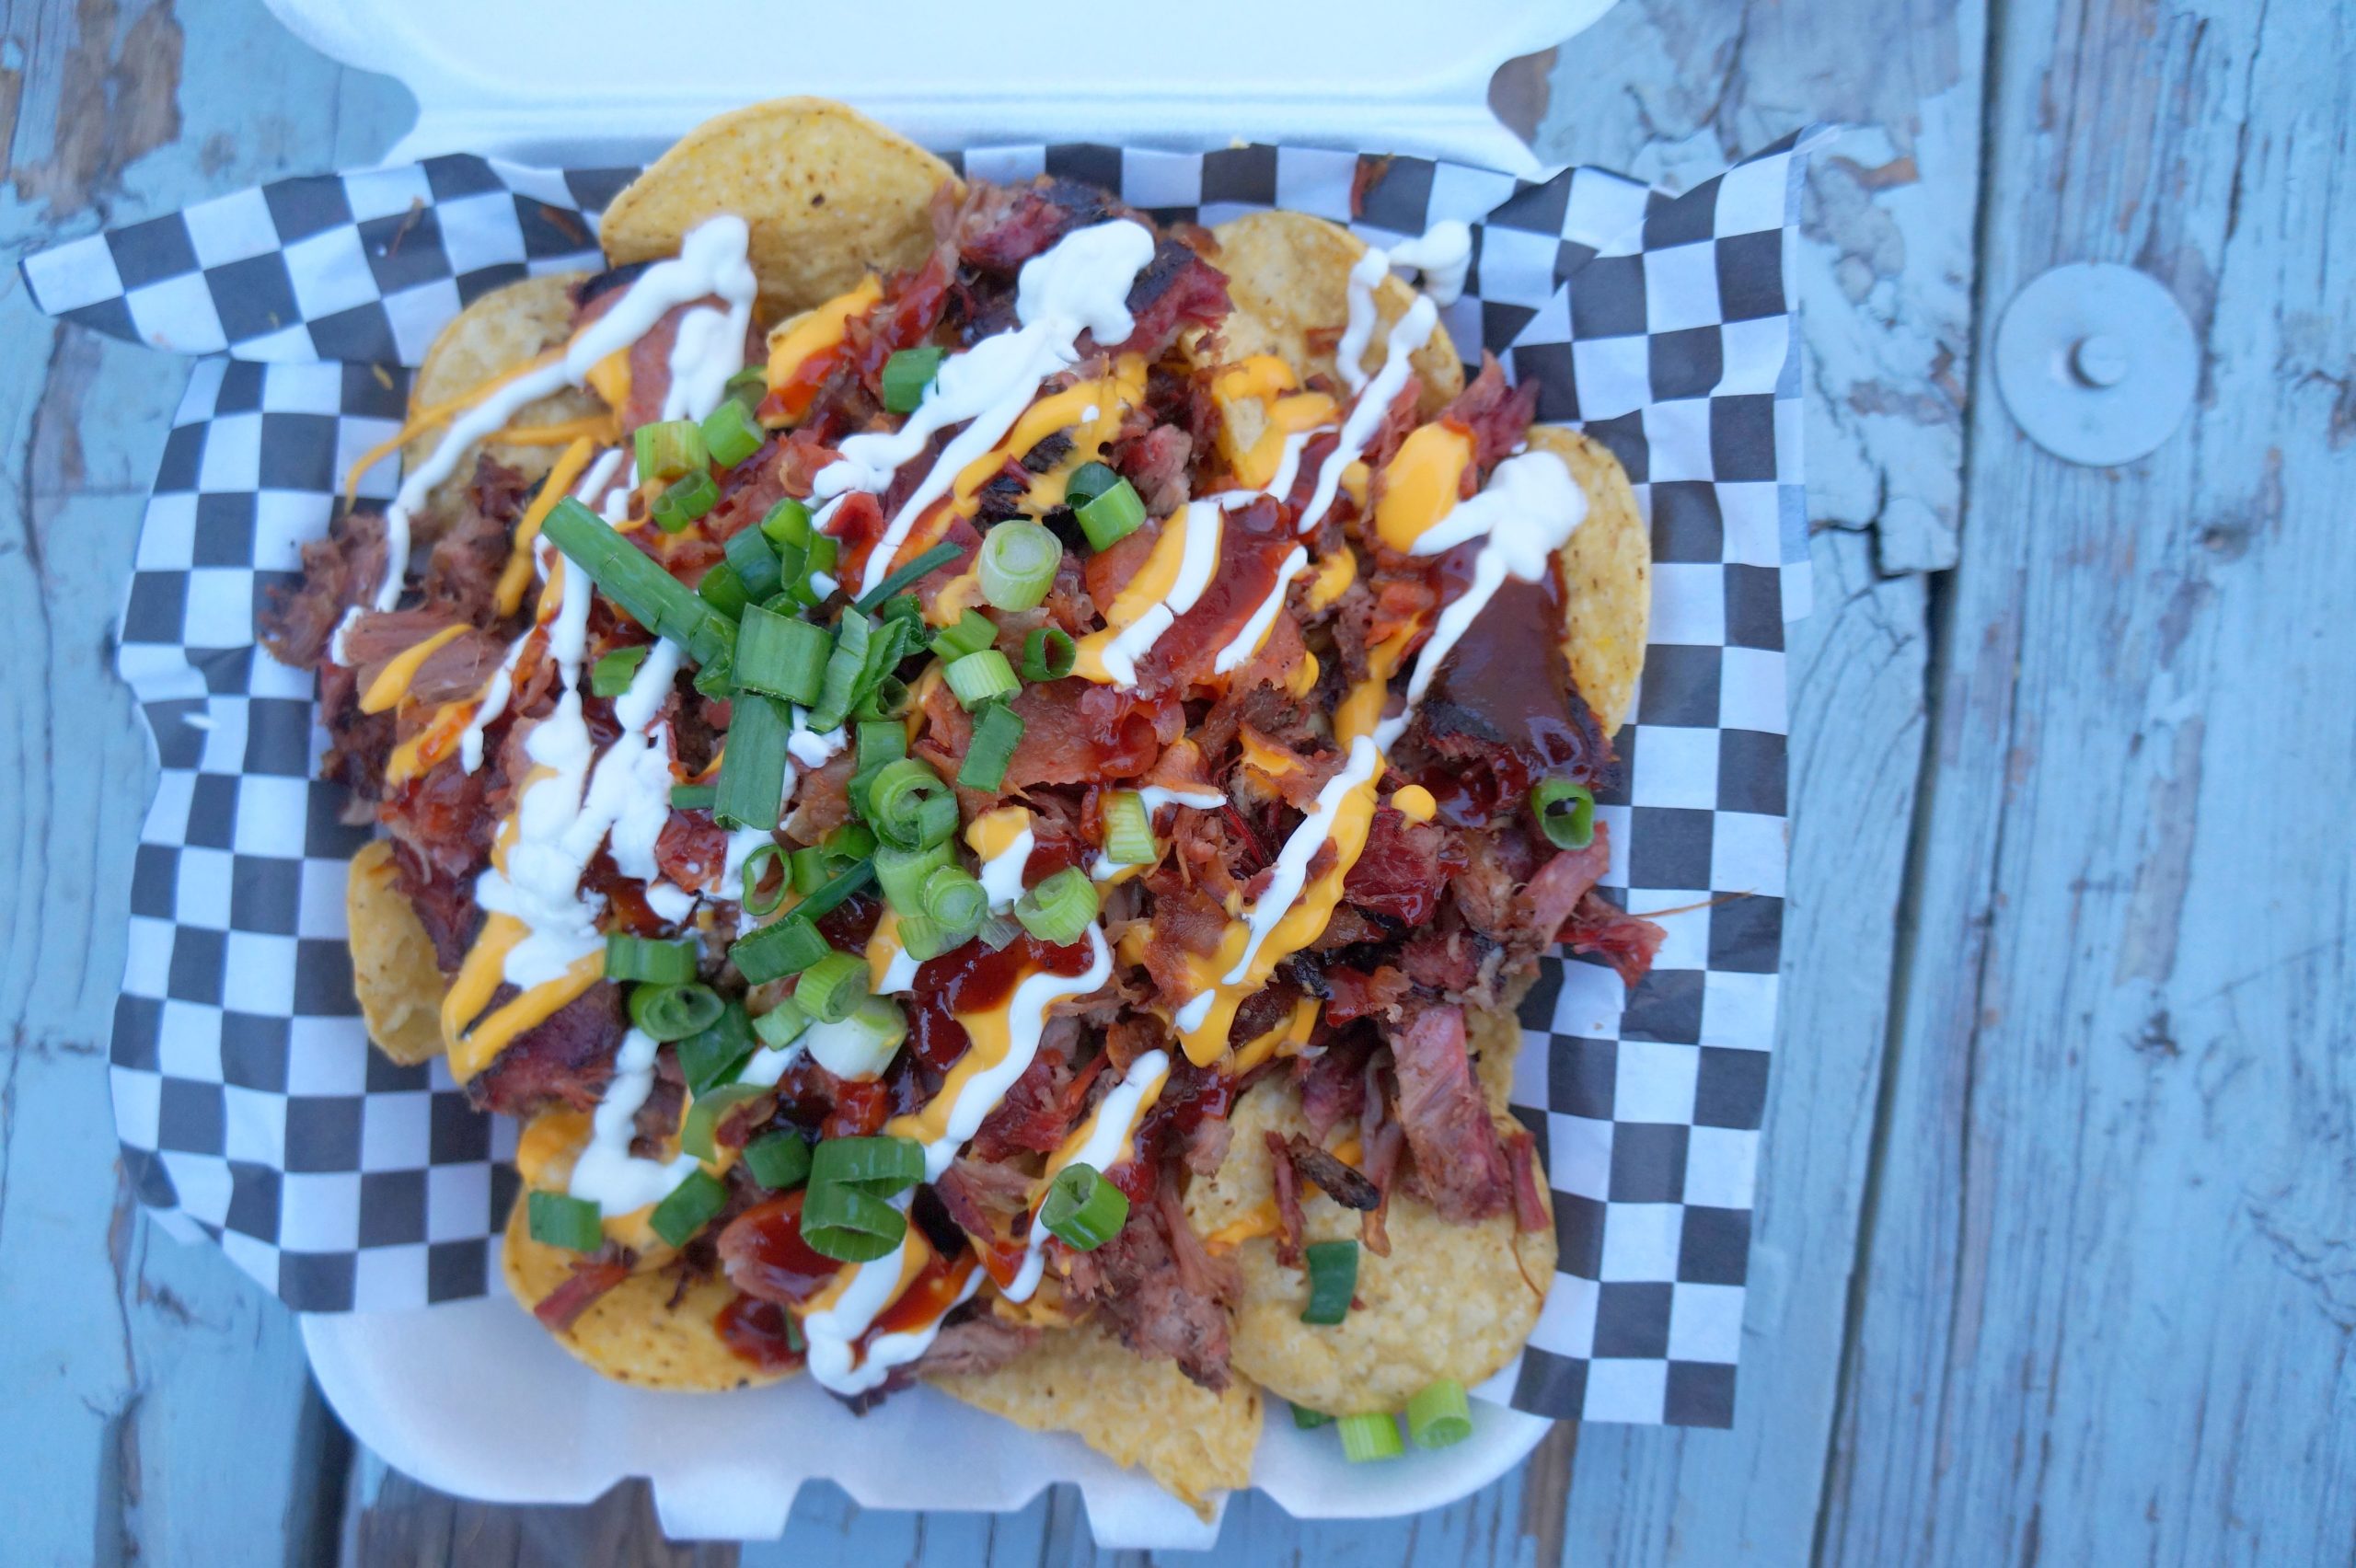 Loaded Pulled Pork Nachos (Photo by Mark Whittaker)